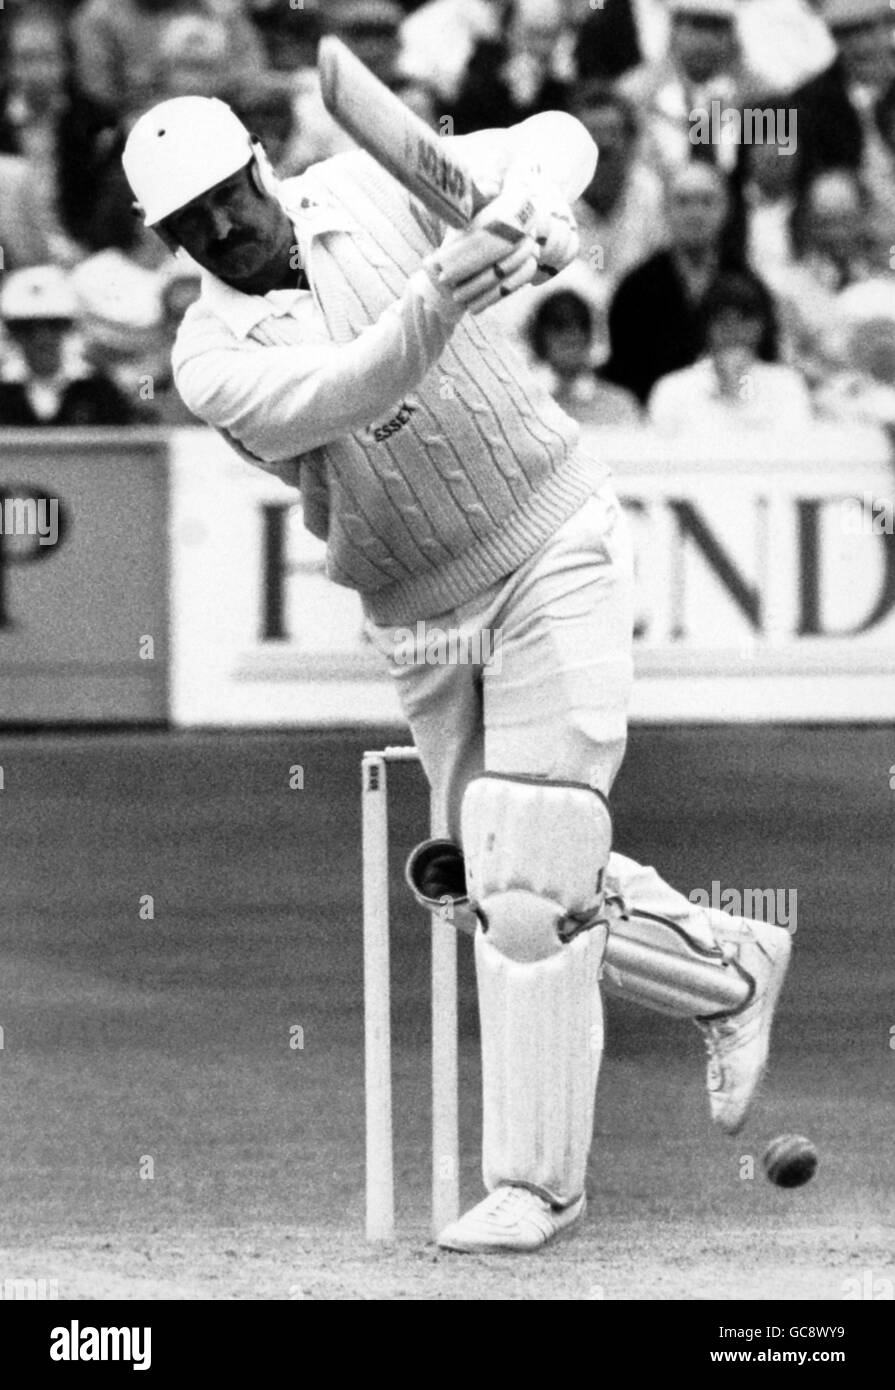 Cricket - Essex v Hampshire - Benson and Hedges Cup 1988 (Semi-Final) - Day One - The County Ground, Chelmsford. Essex batsman Graham Gooch in fine batting action Stock Photo